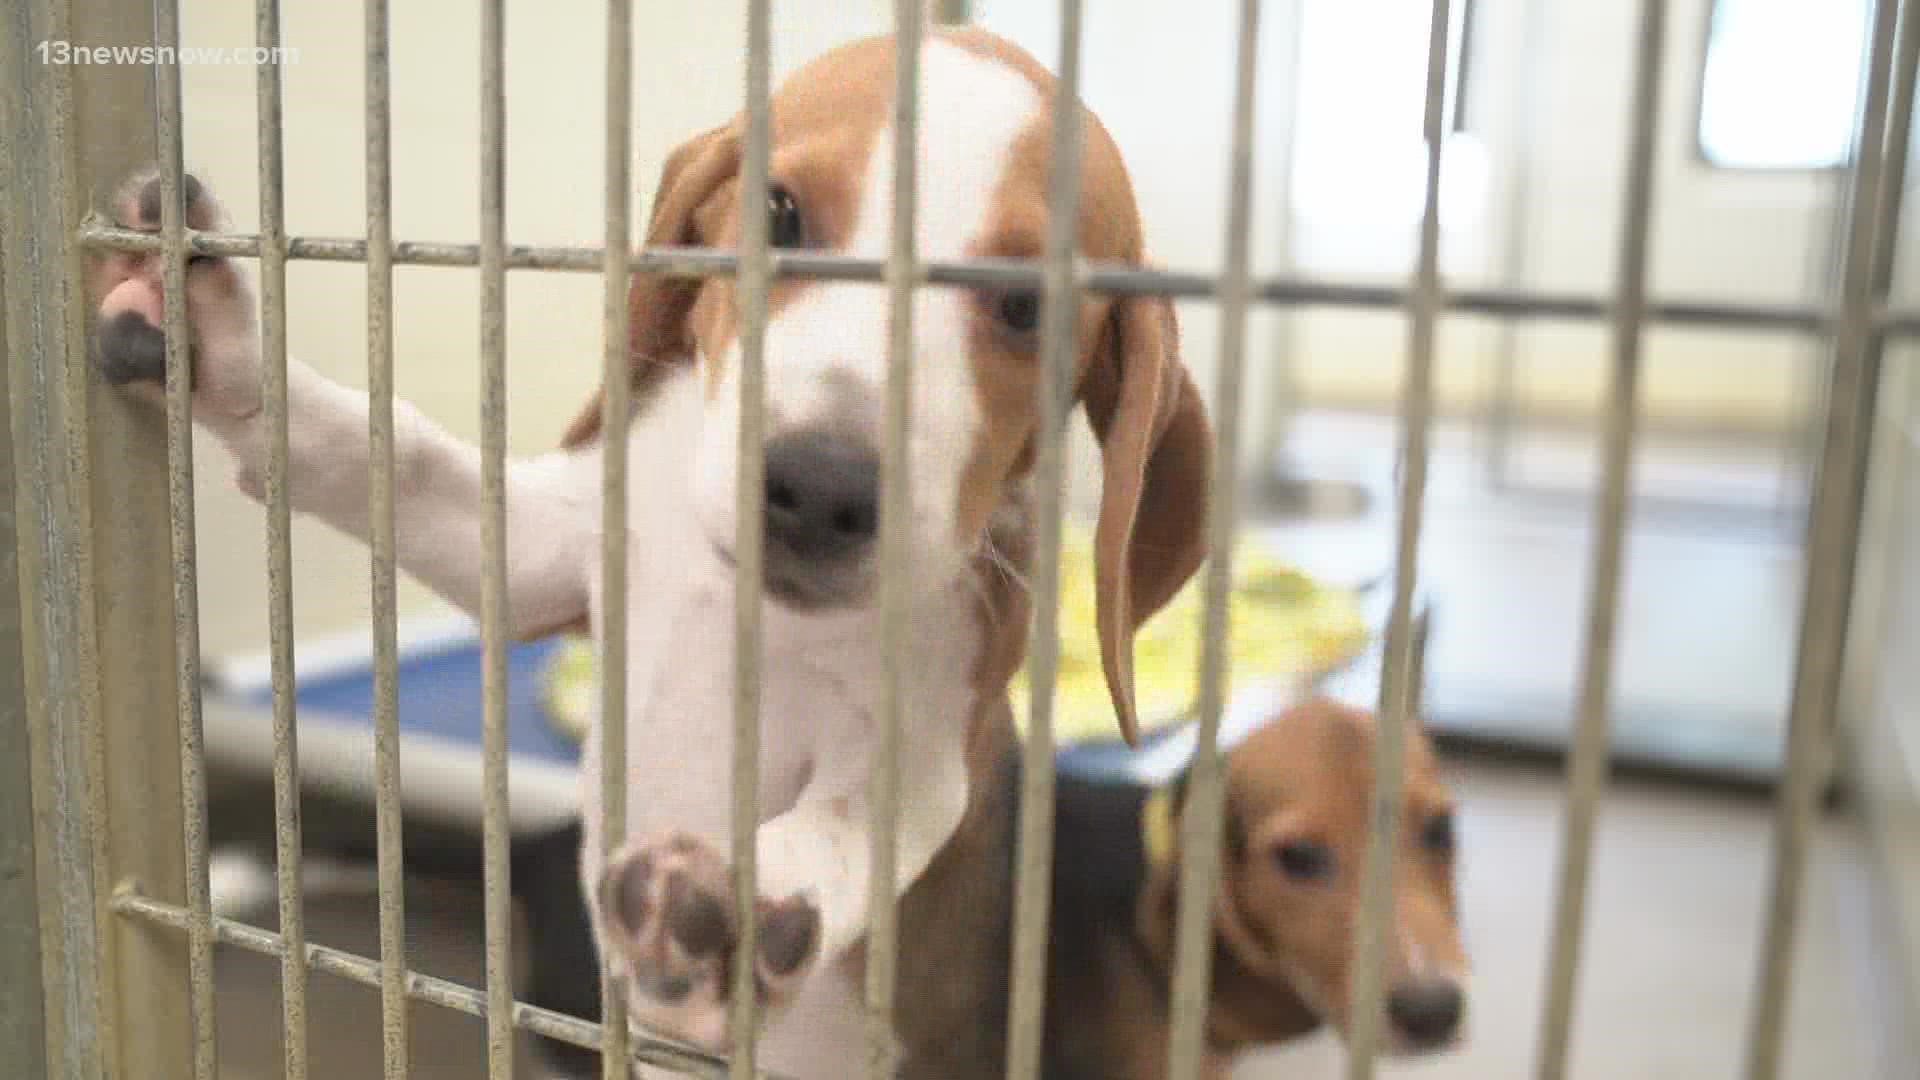 Today, the Virginia Beach SPCA began adoptions for beagles that were rescued from a breeding facility in Cumberland County.